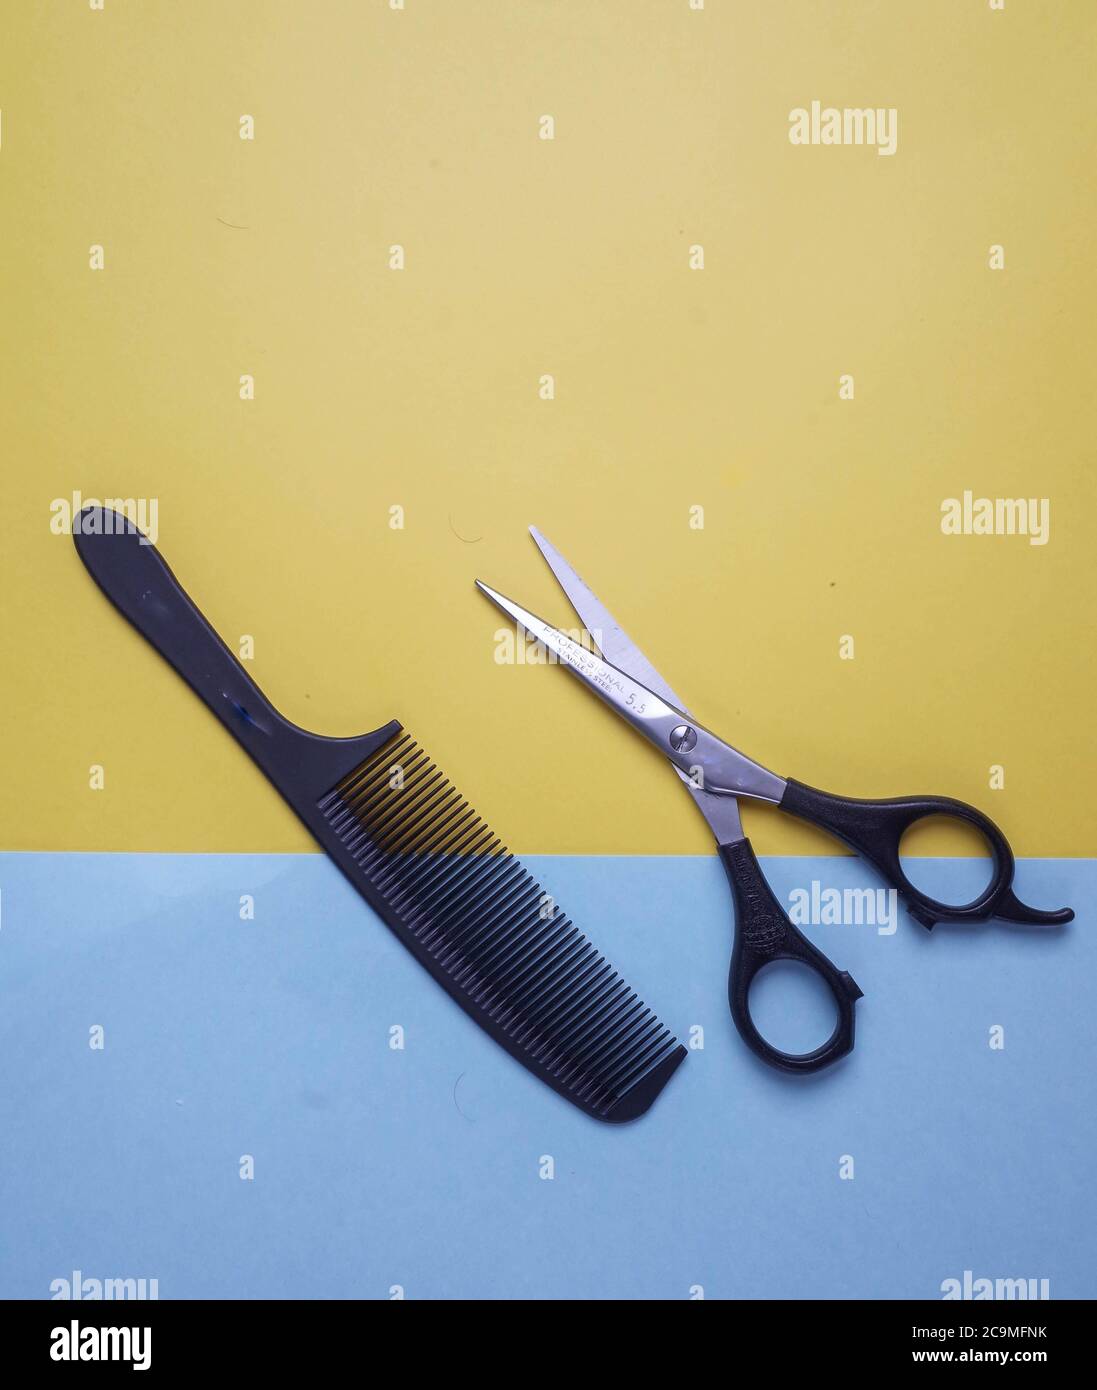 flat lay of scissors and comb on colored paper Stock Photo